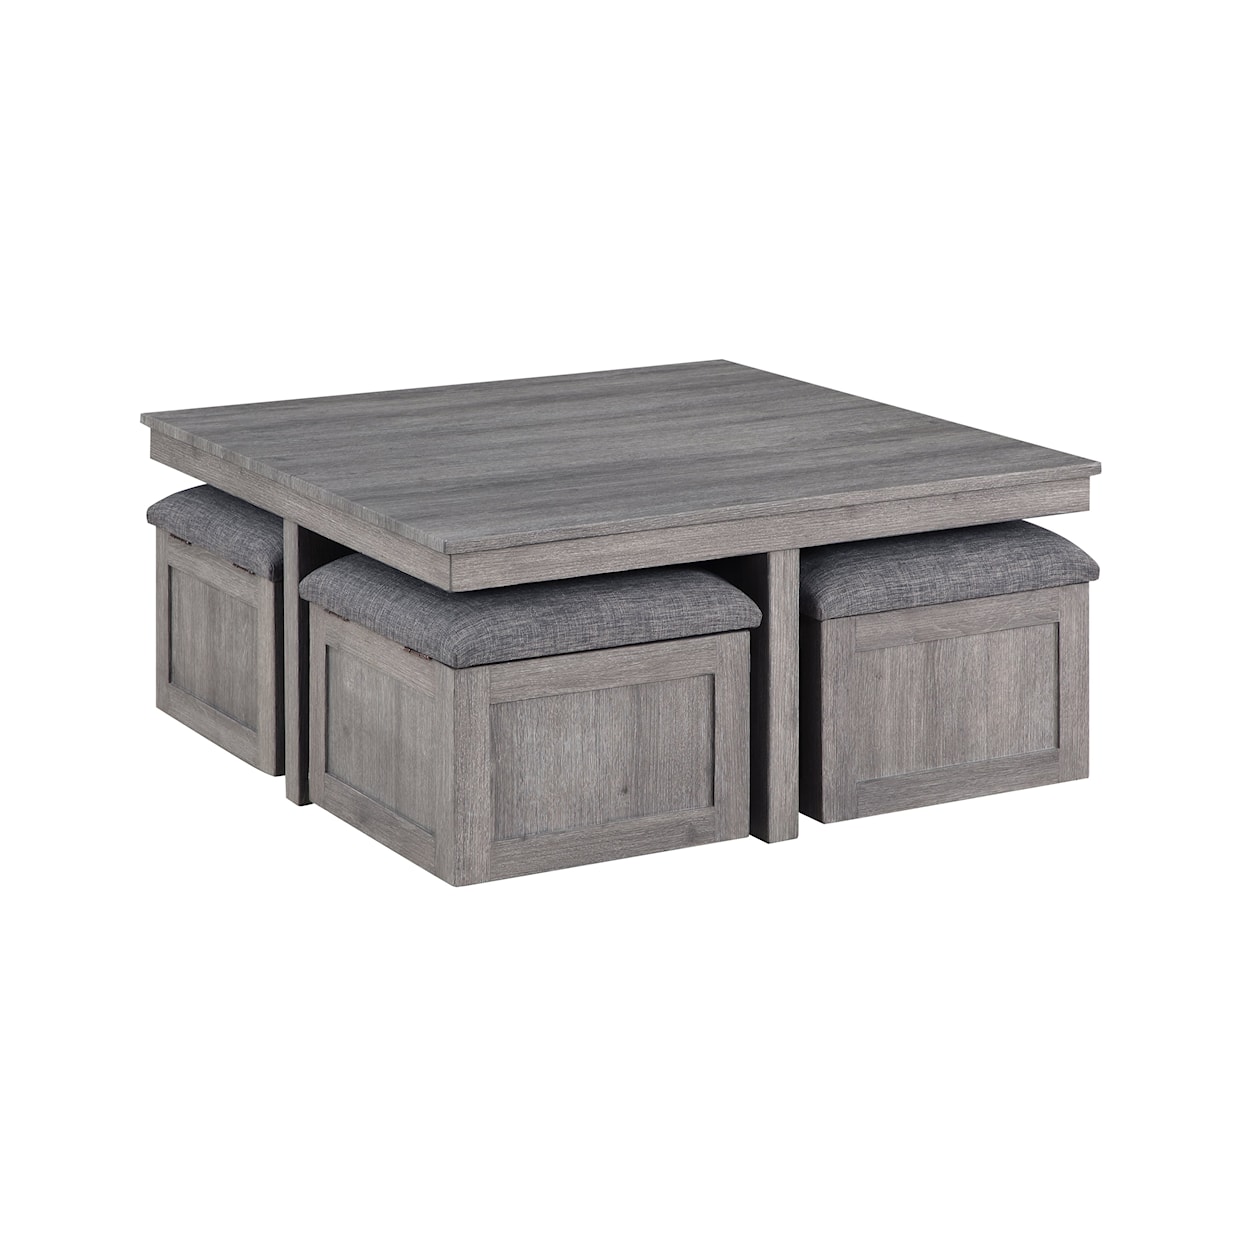 Exclusive Moseberg Coffee Table with Storage Stools